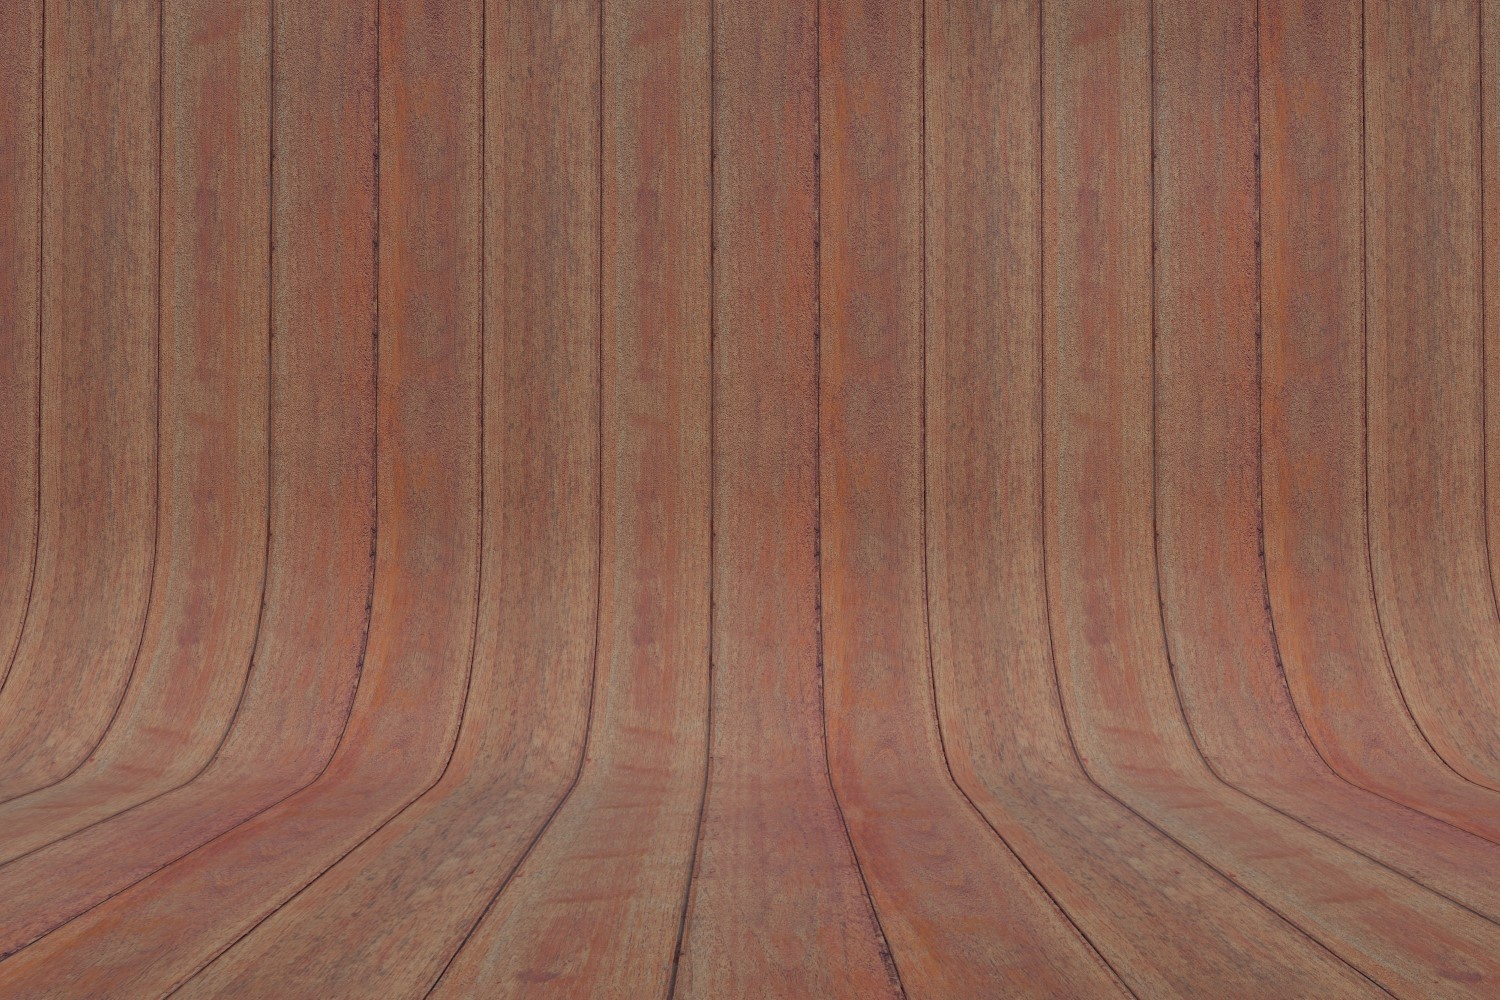 Curved red and brown Wood Parquet background